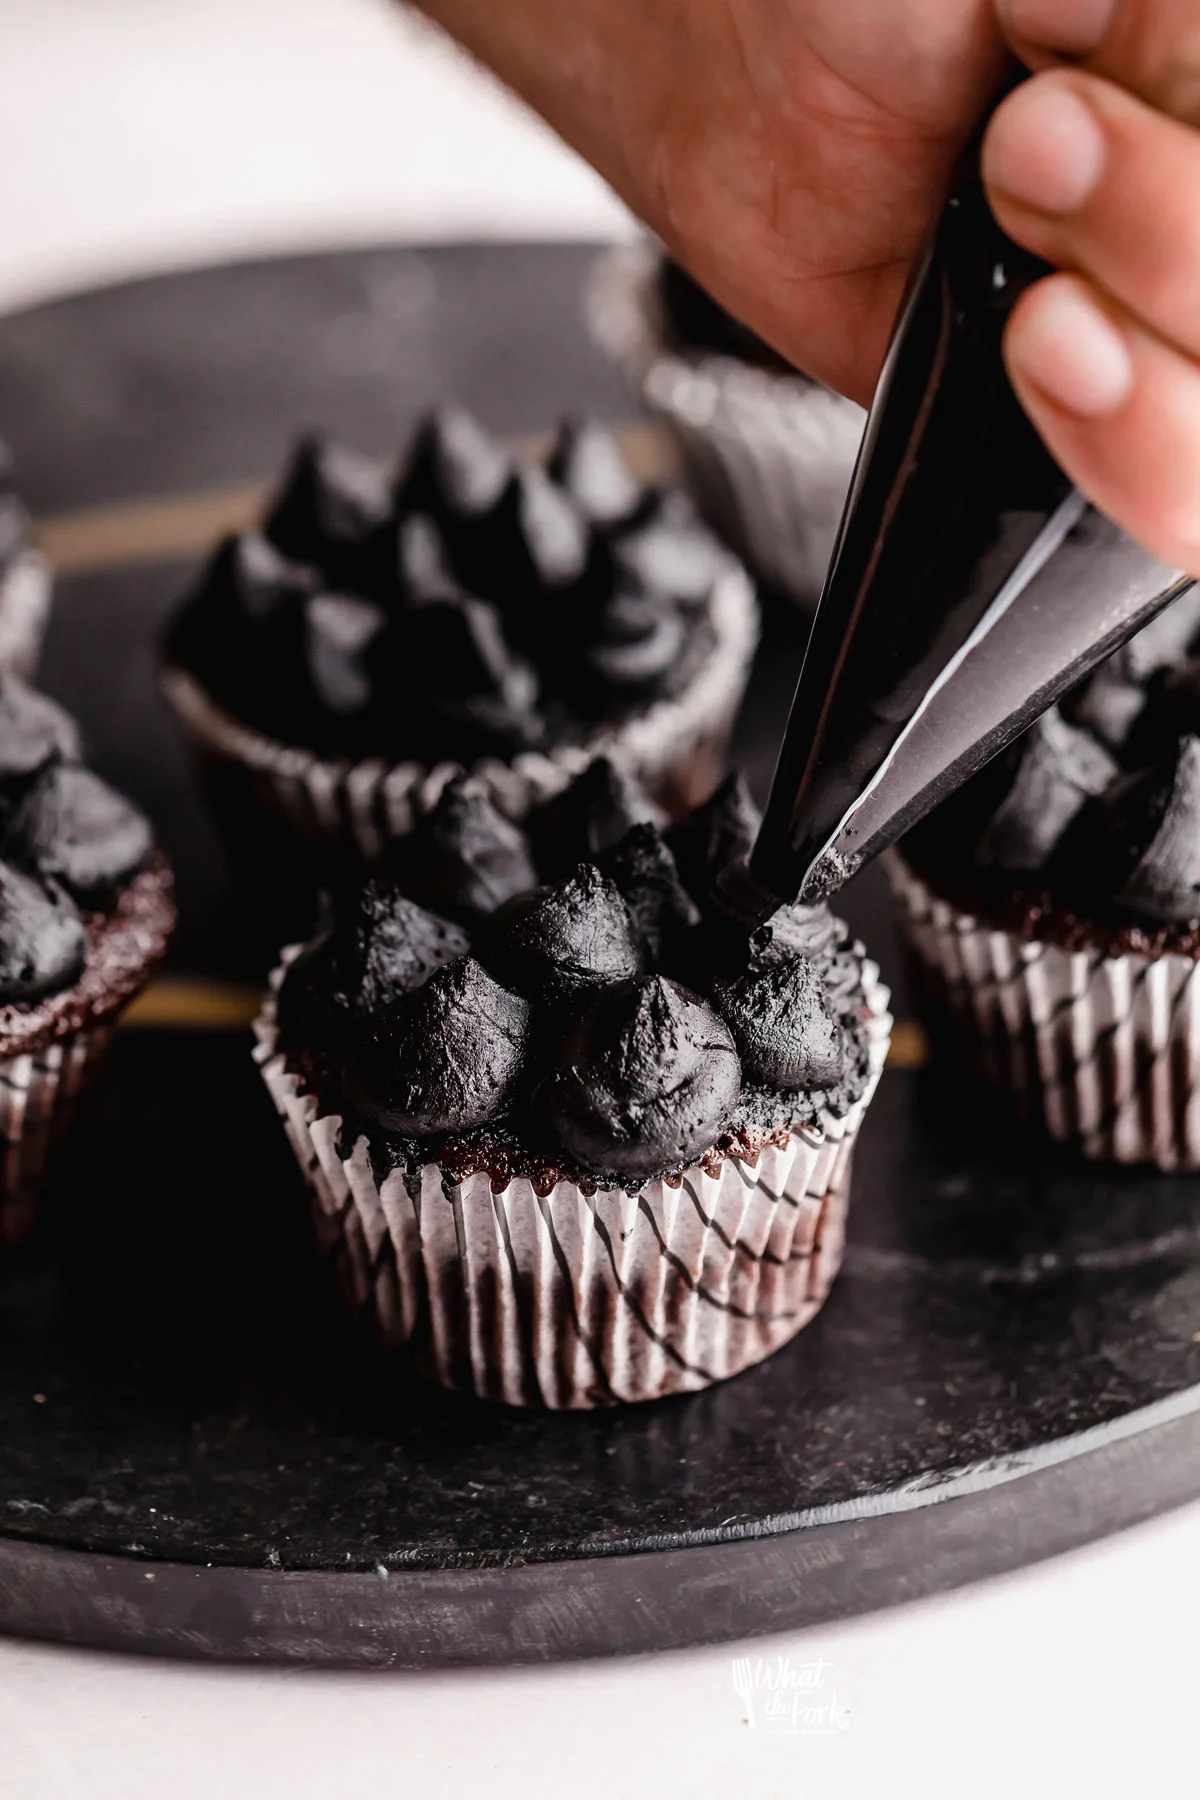 a hand holding a clear piping bag filled with black frosting piping dollops of it onto a chocolate cupcake in a white paper liner